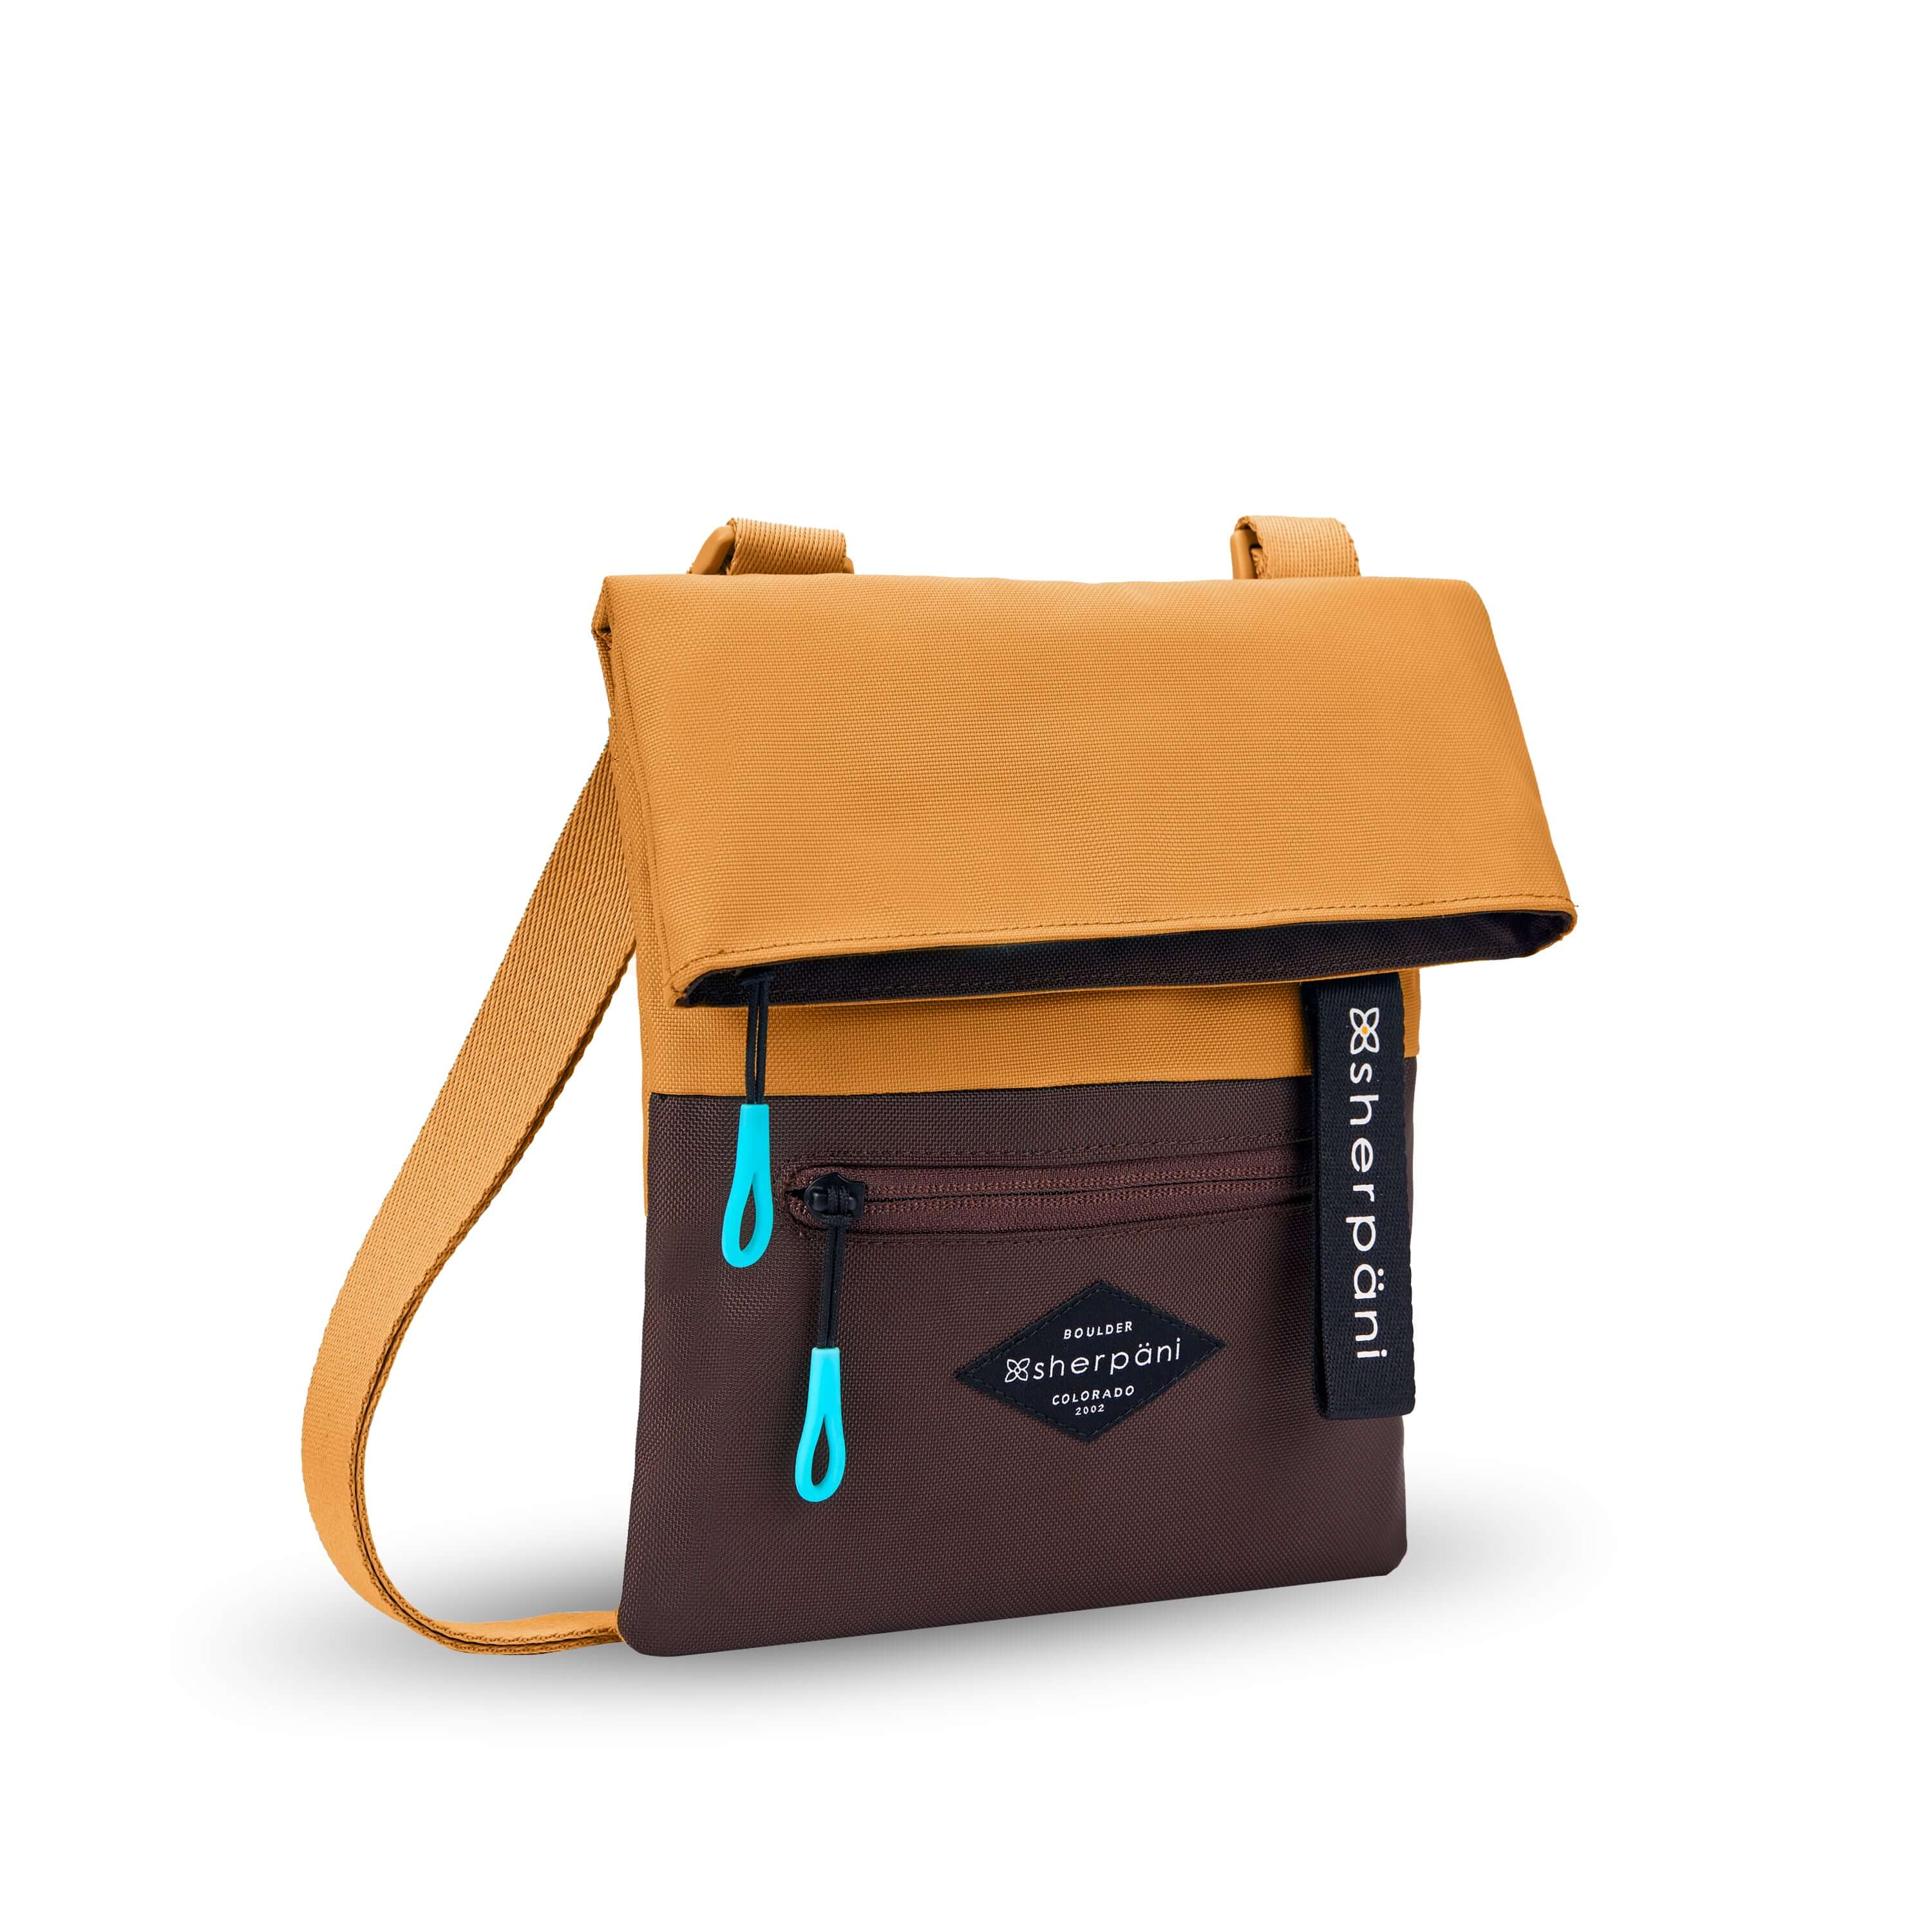 Angled front view of Sherpani crossbody, the Pica in Sundial. The bag is two toned: the top half is burnt yellow and the bottom half is brown. There is an external zipper pocket on the front panel. Easy pull zippers are accented in aqua. The top of the bag folds over creating a signature look. A branded Sherpani keychain is clipped to the upper right corner. The bag has an adjustable crossbody strap. 